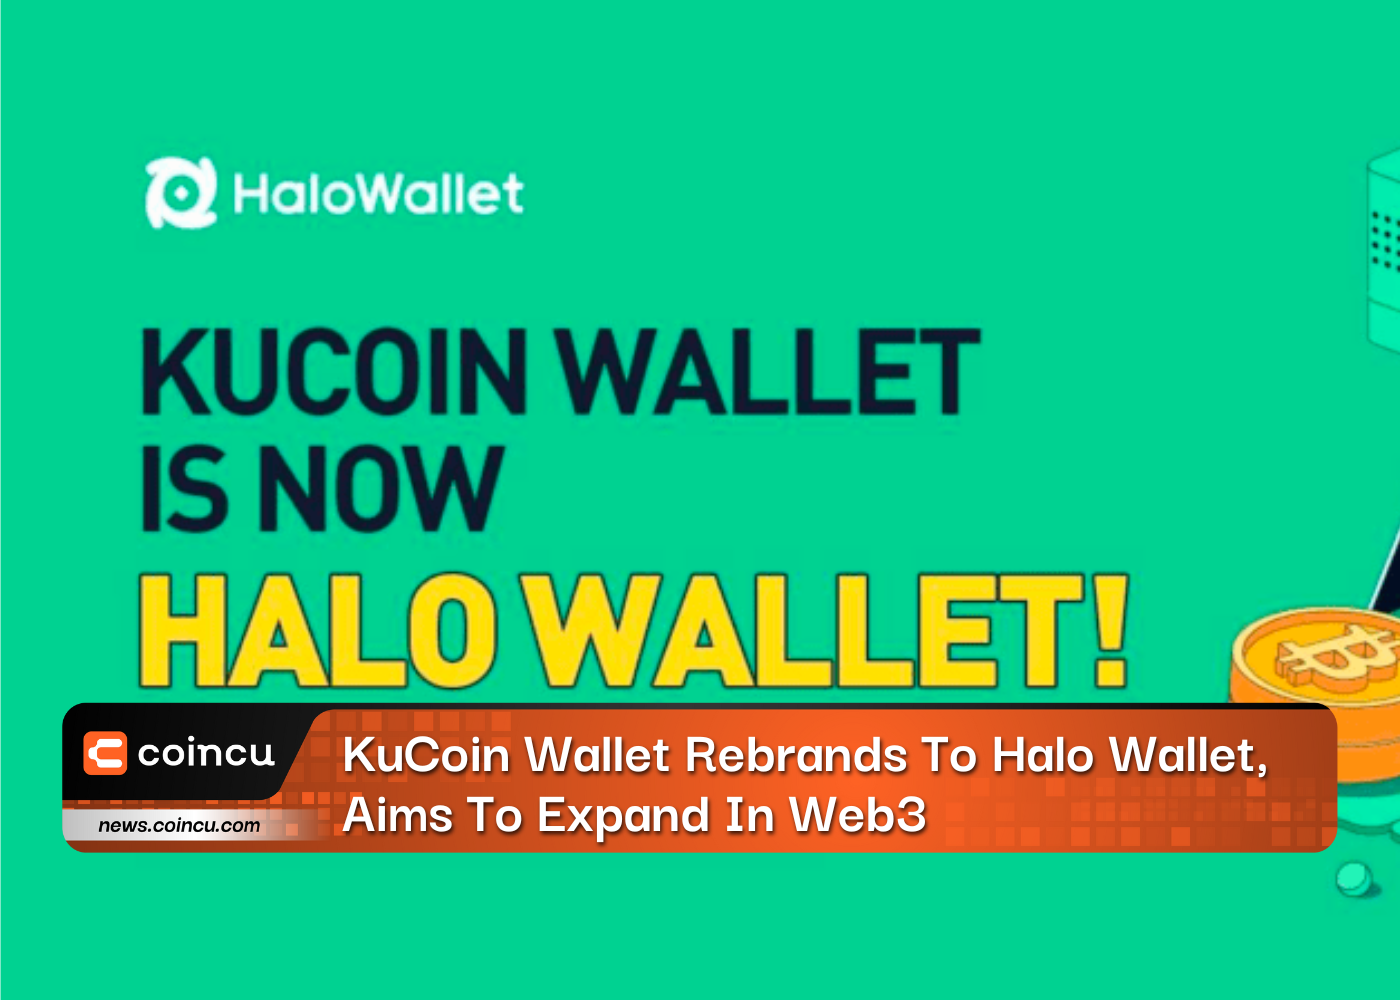 KuCoin Wallet Rebrands To Halo Wallet, Aims To Expand In Web3